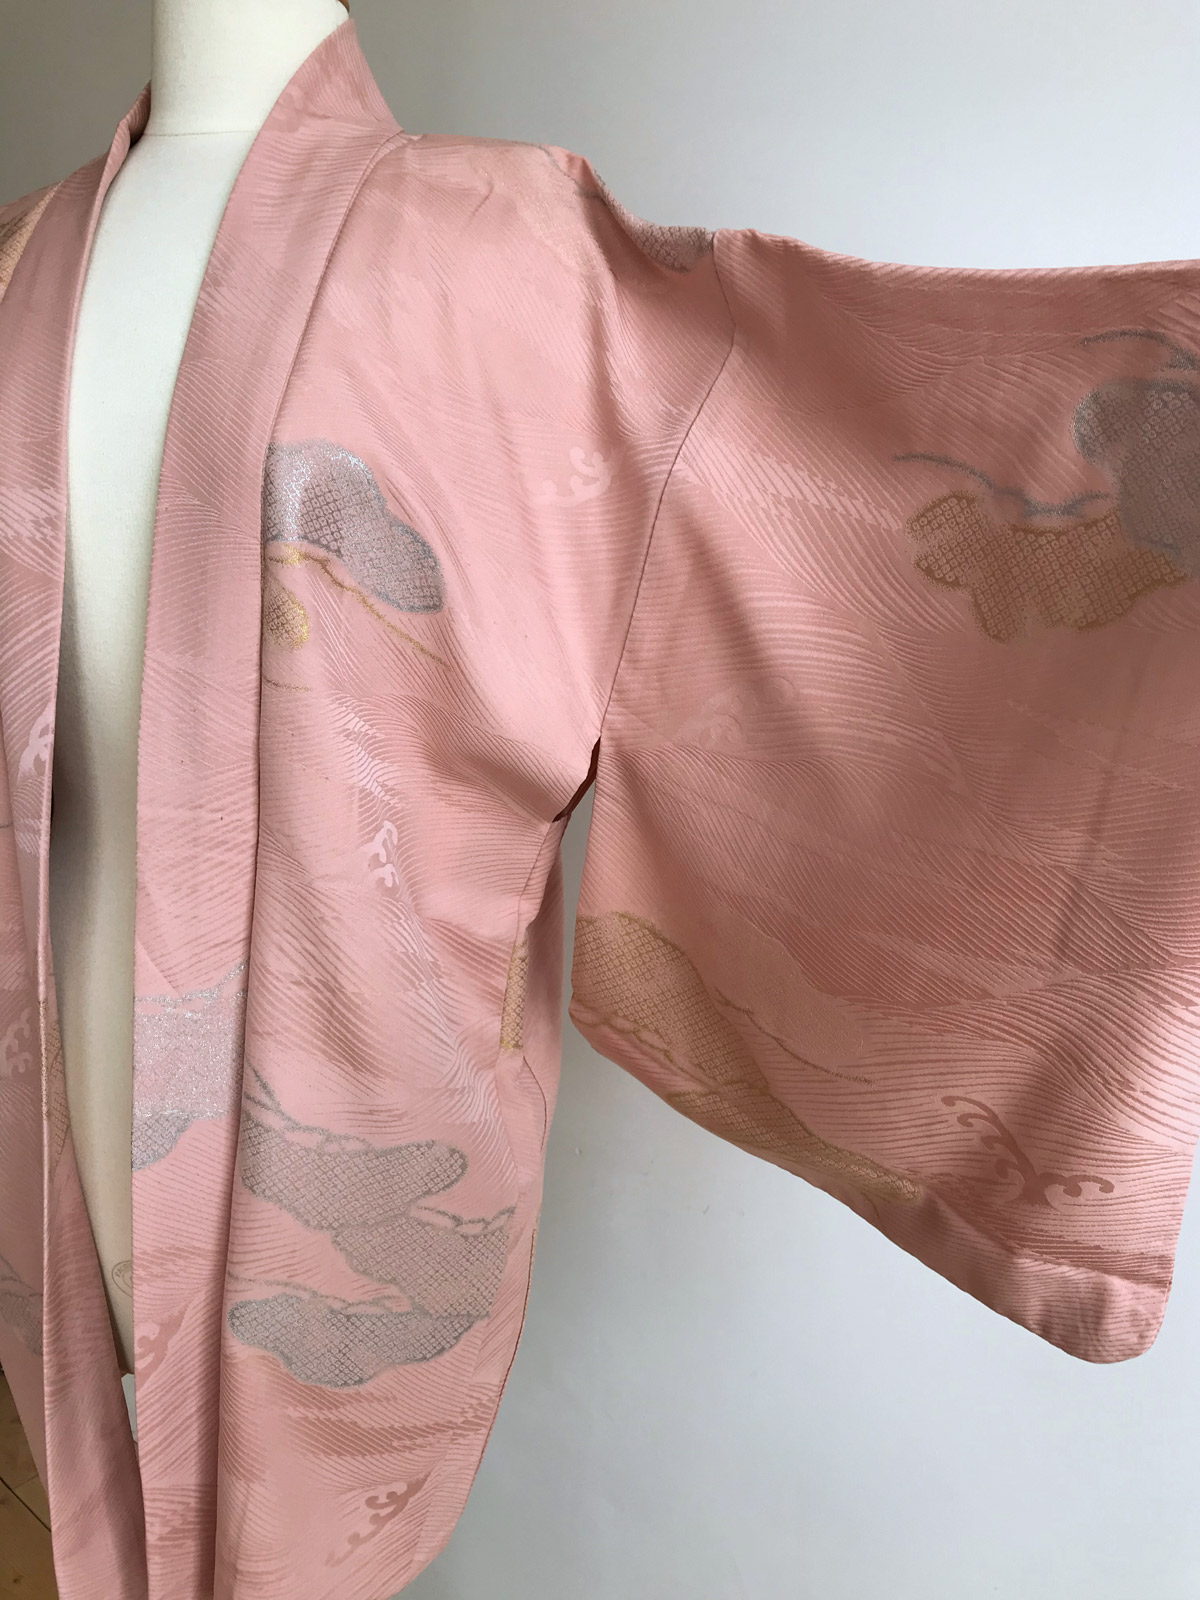 Nami – Kimono jacket in light pink with woven waves pattern